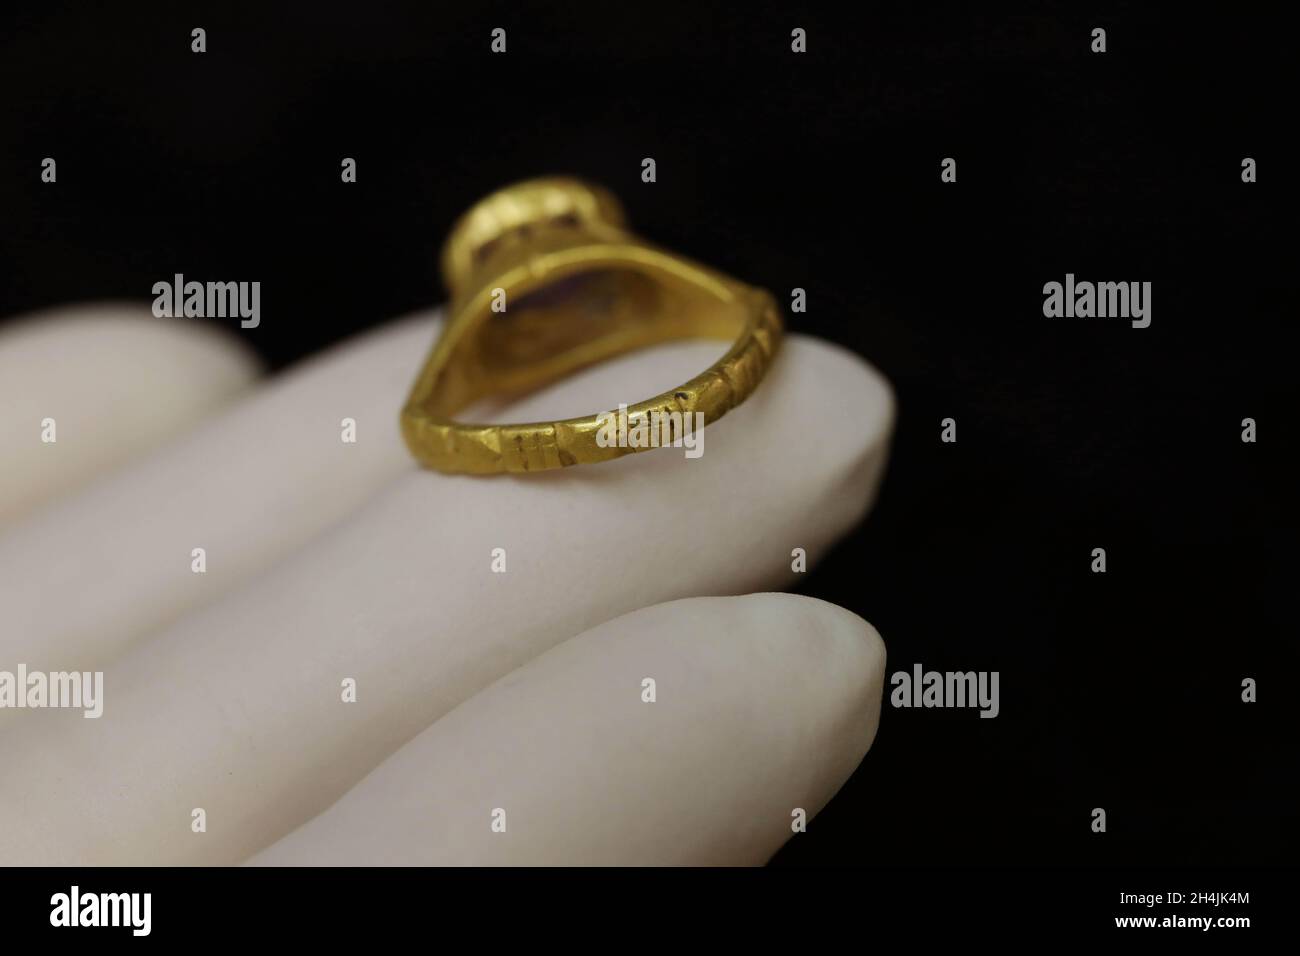 Jerusalem. 3rd Nov, 2021. Photo taken on Nov. 3, 2021 shows a 1,300-year-old gold ring at the Israeli Antiquities Authority lab in Jerusalem. Israeli archaeologists have found a gold ring dating back to over 1,300 years ago, the Israel Antiquities Authority (IAA) said on Tuesday. The 5.11-gram ring, set with an inlay of a silica purple stone called amethyst, has been unearthed in an excavation at the city of Yavne in central Israel, the IAA added. Credit: Gil Cohen Magen/Xinhua/Alamy Live News Stock Photo